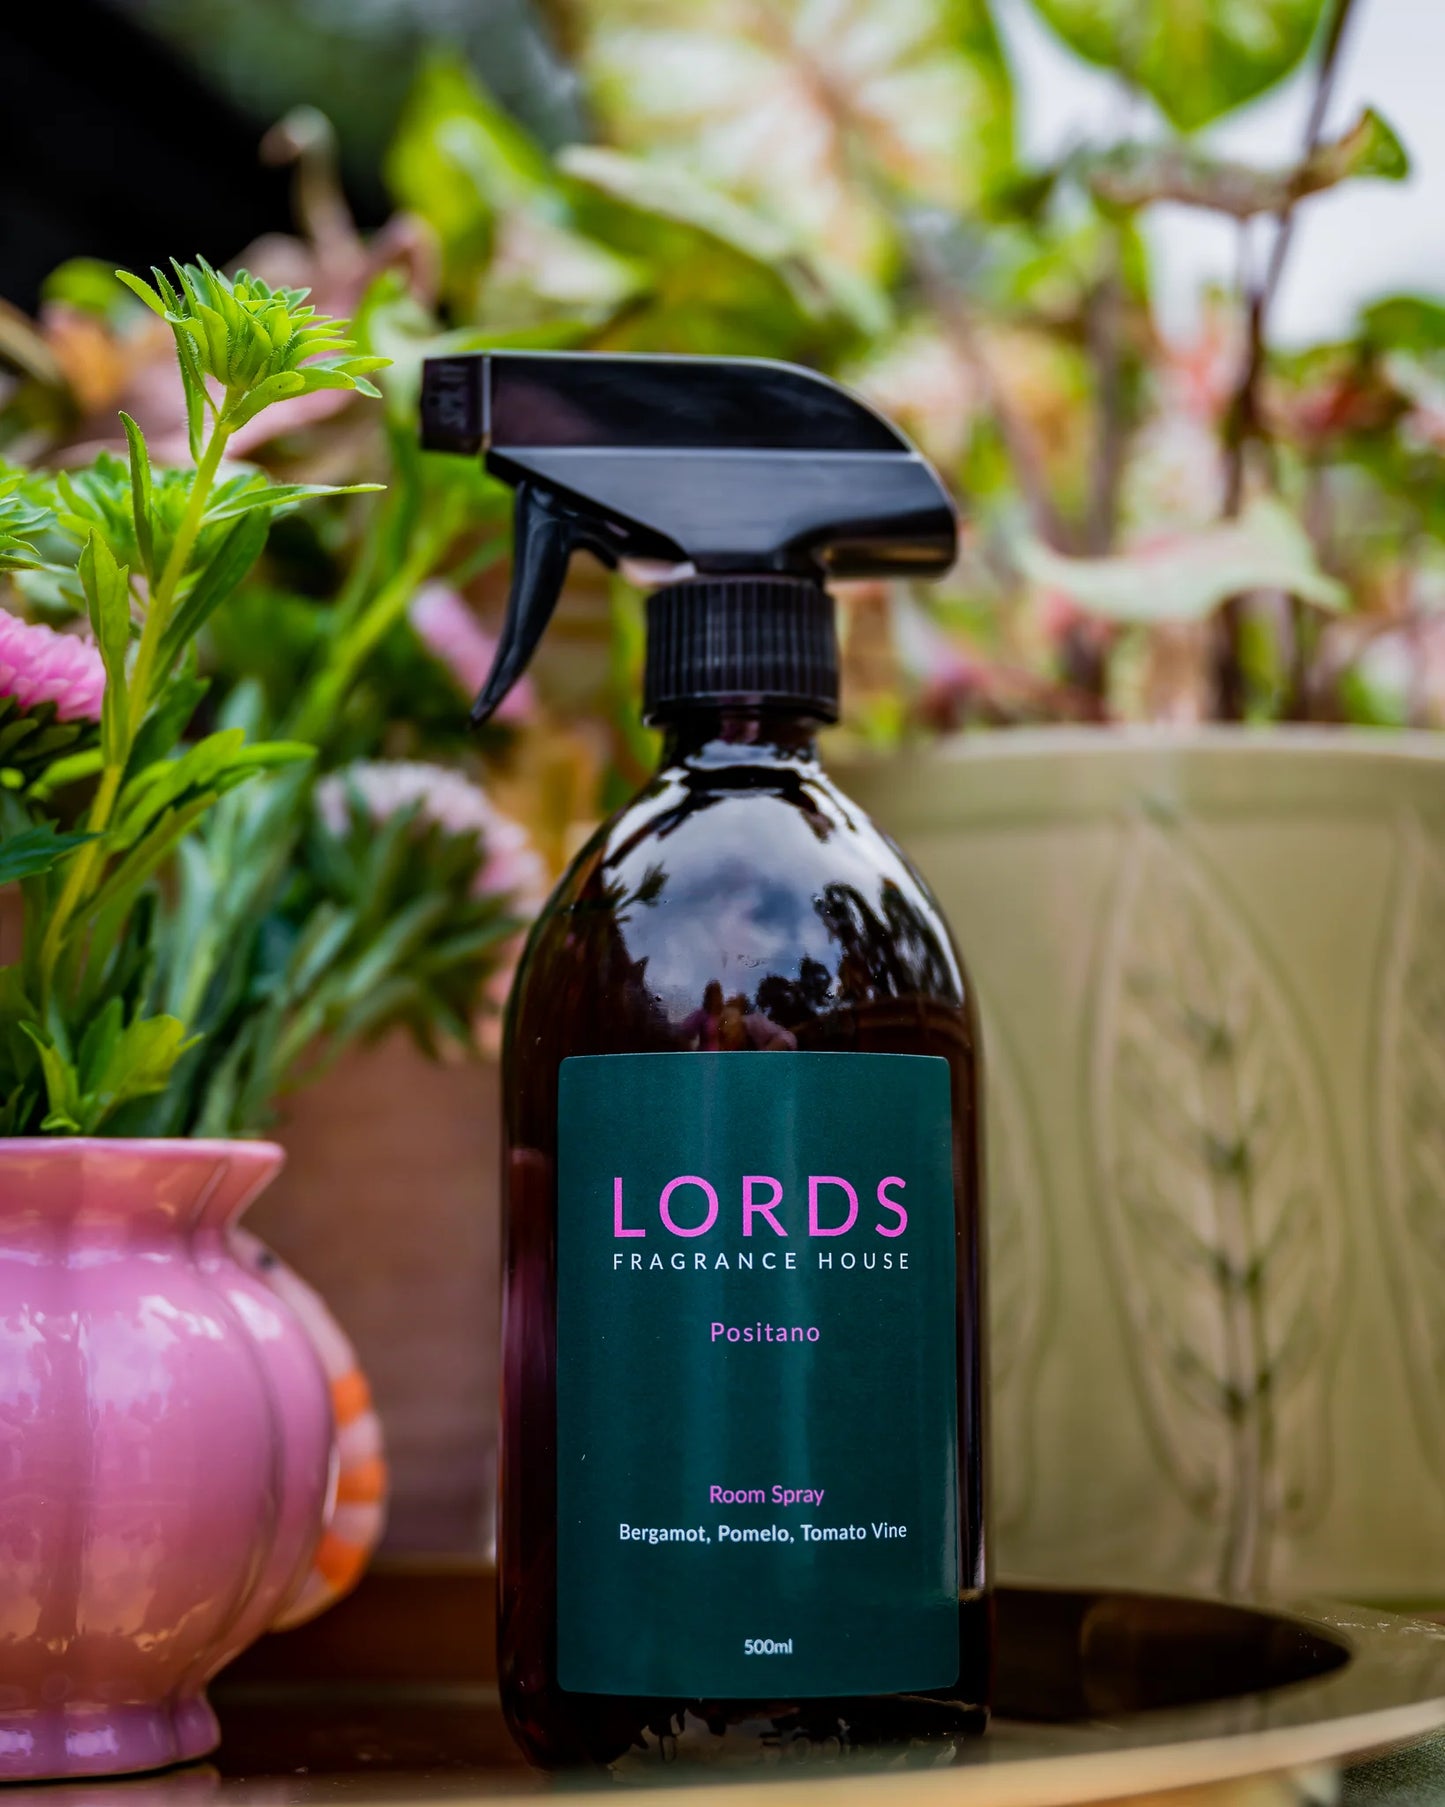 Lords Fragrance House Room Spray 500ml - Various Scents